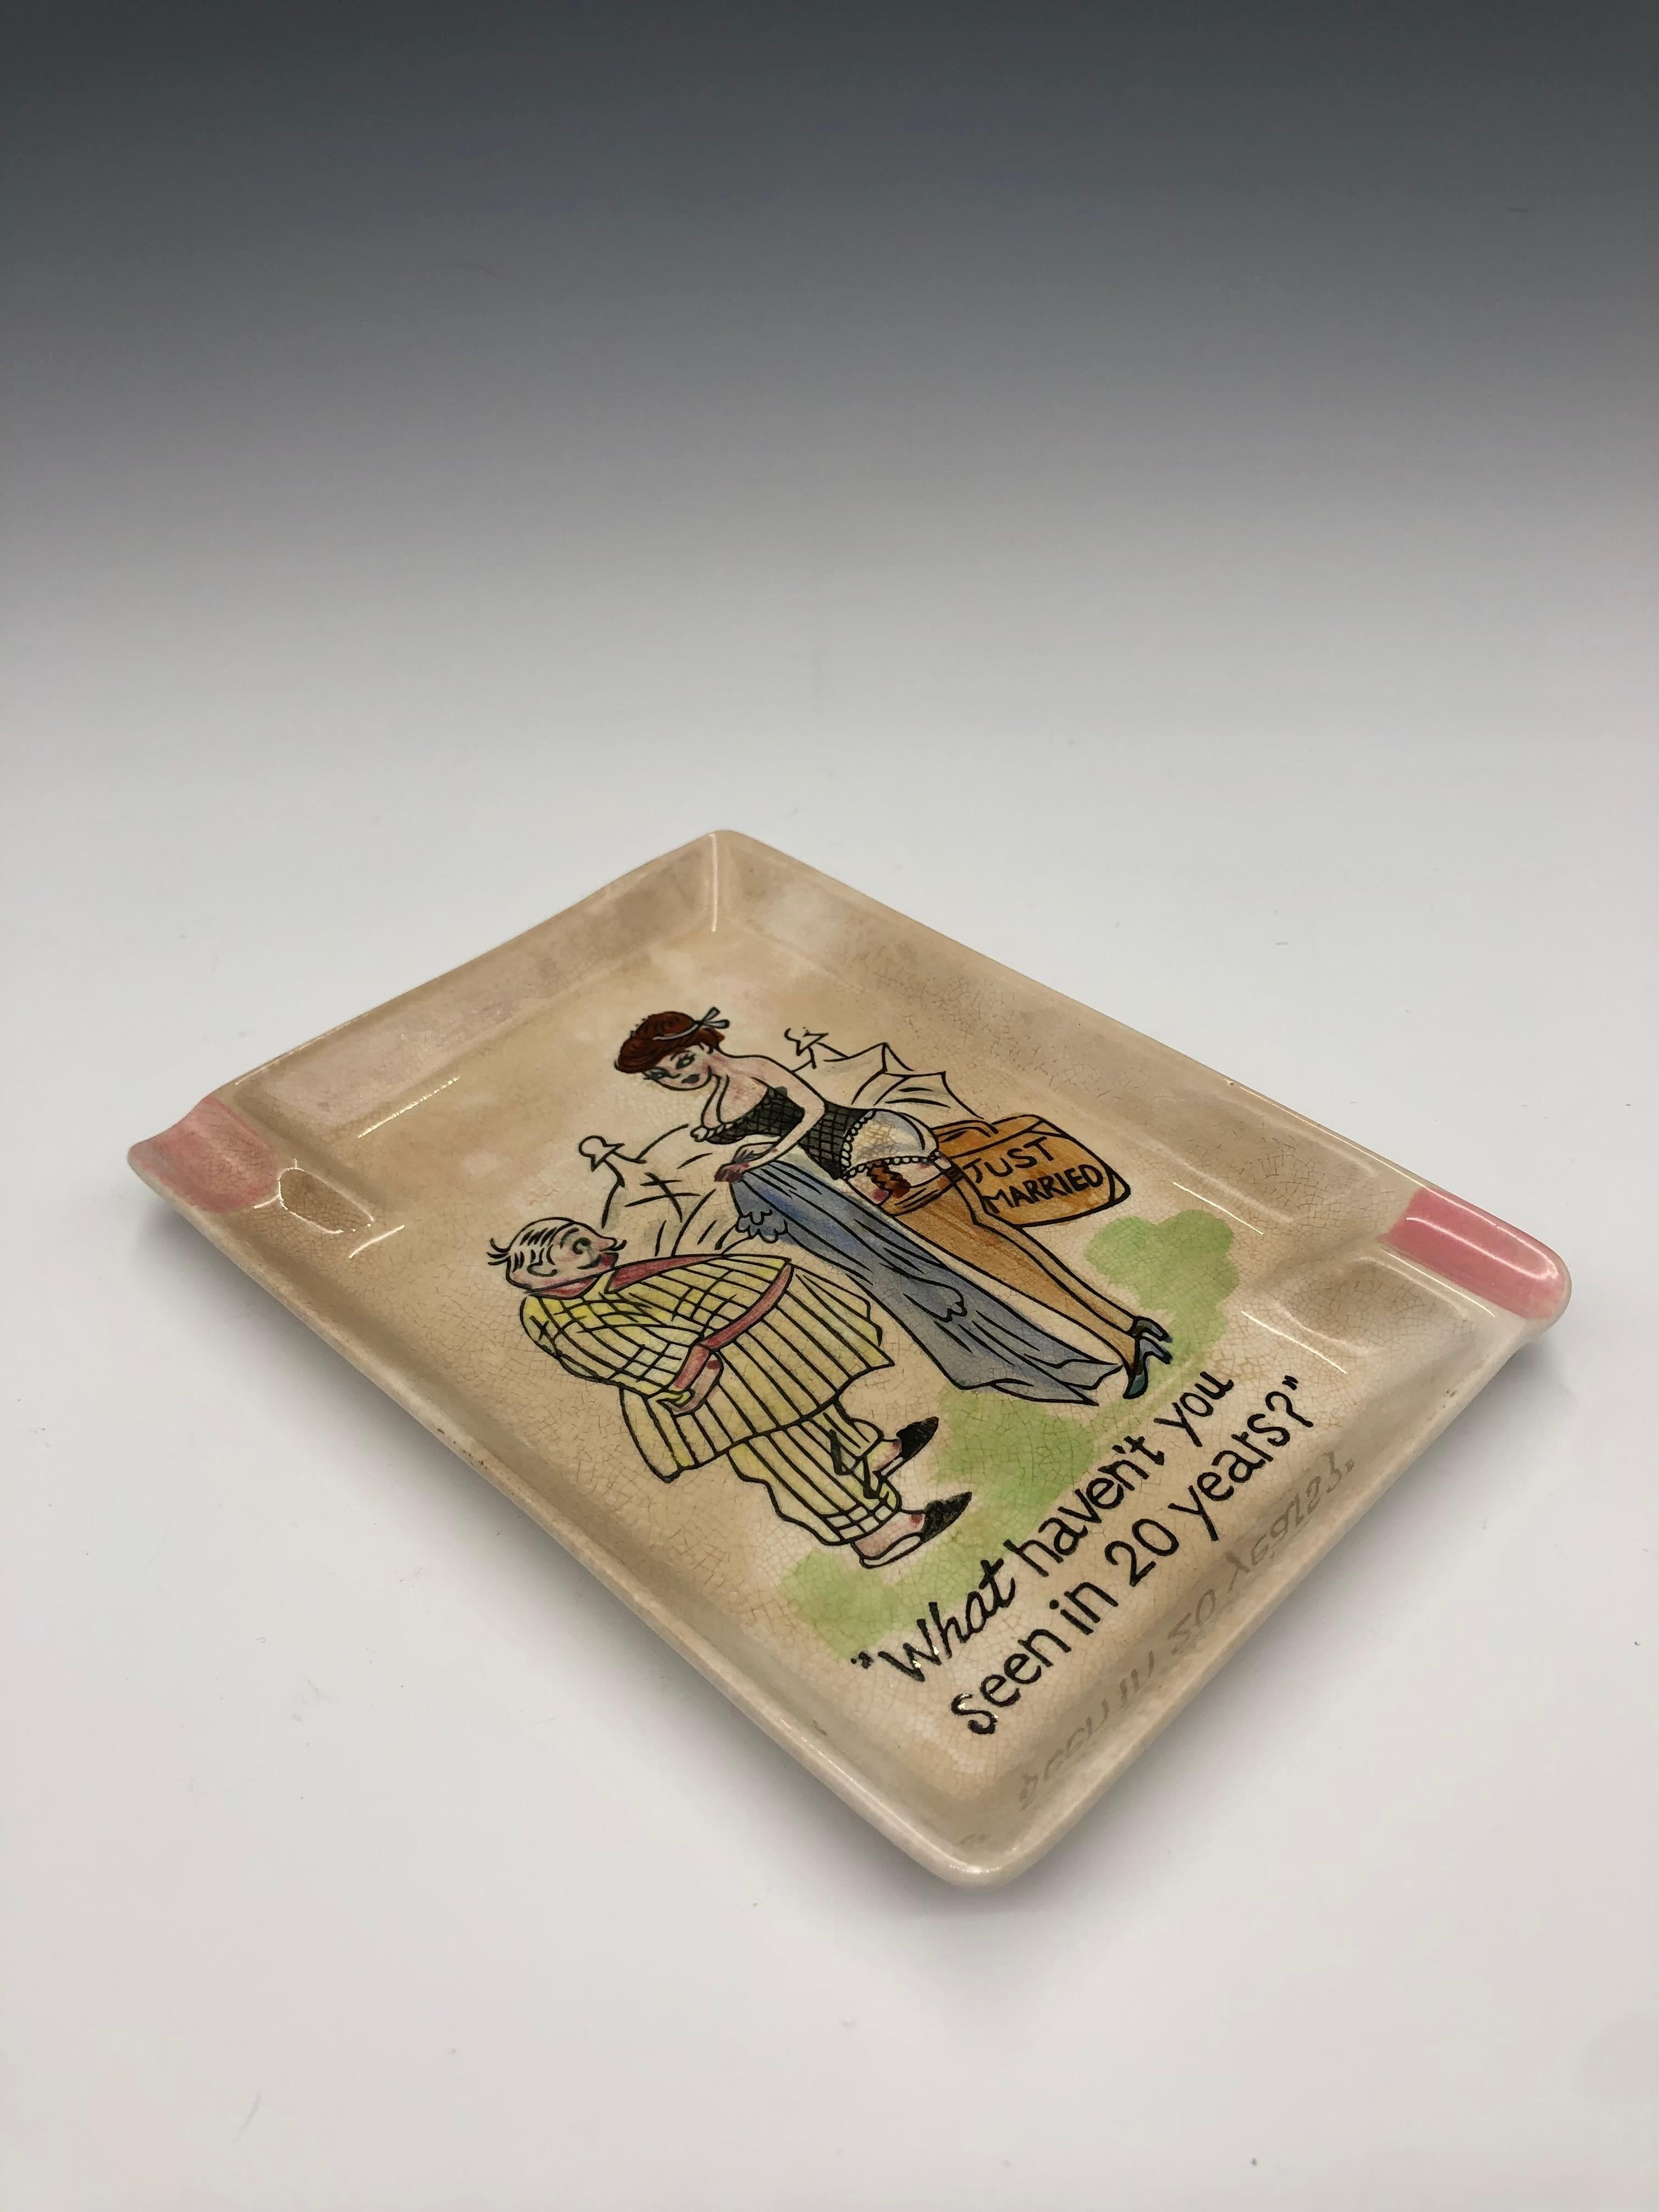 Unknown Figurative Sculpture - Vintage Comic Porcelain Ashtray, Catchall, Tray